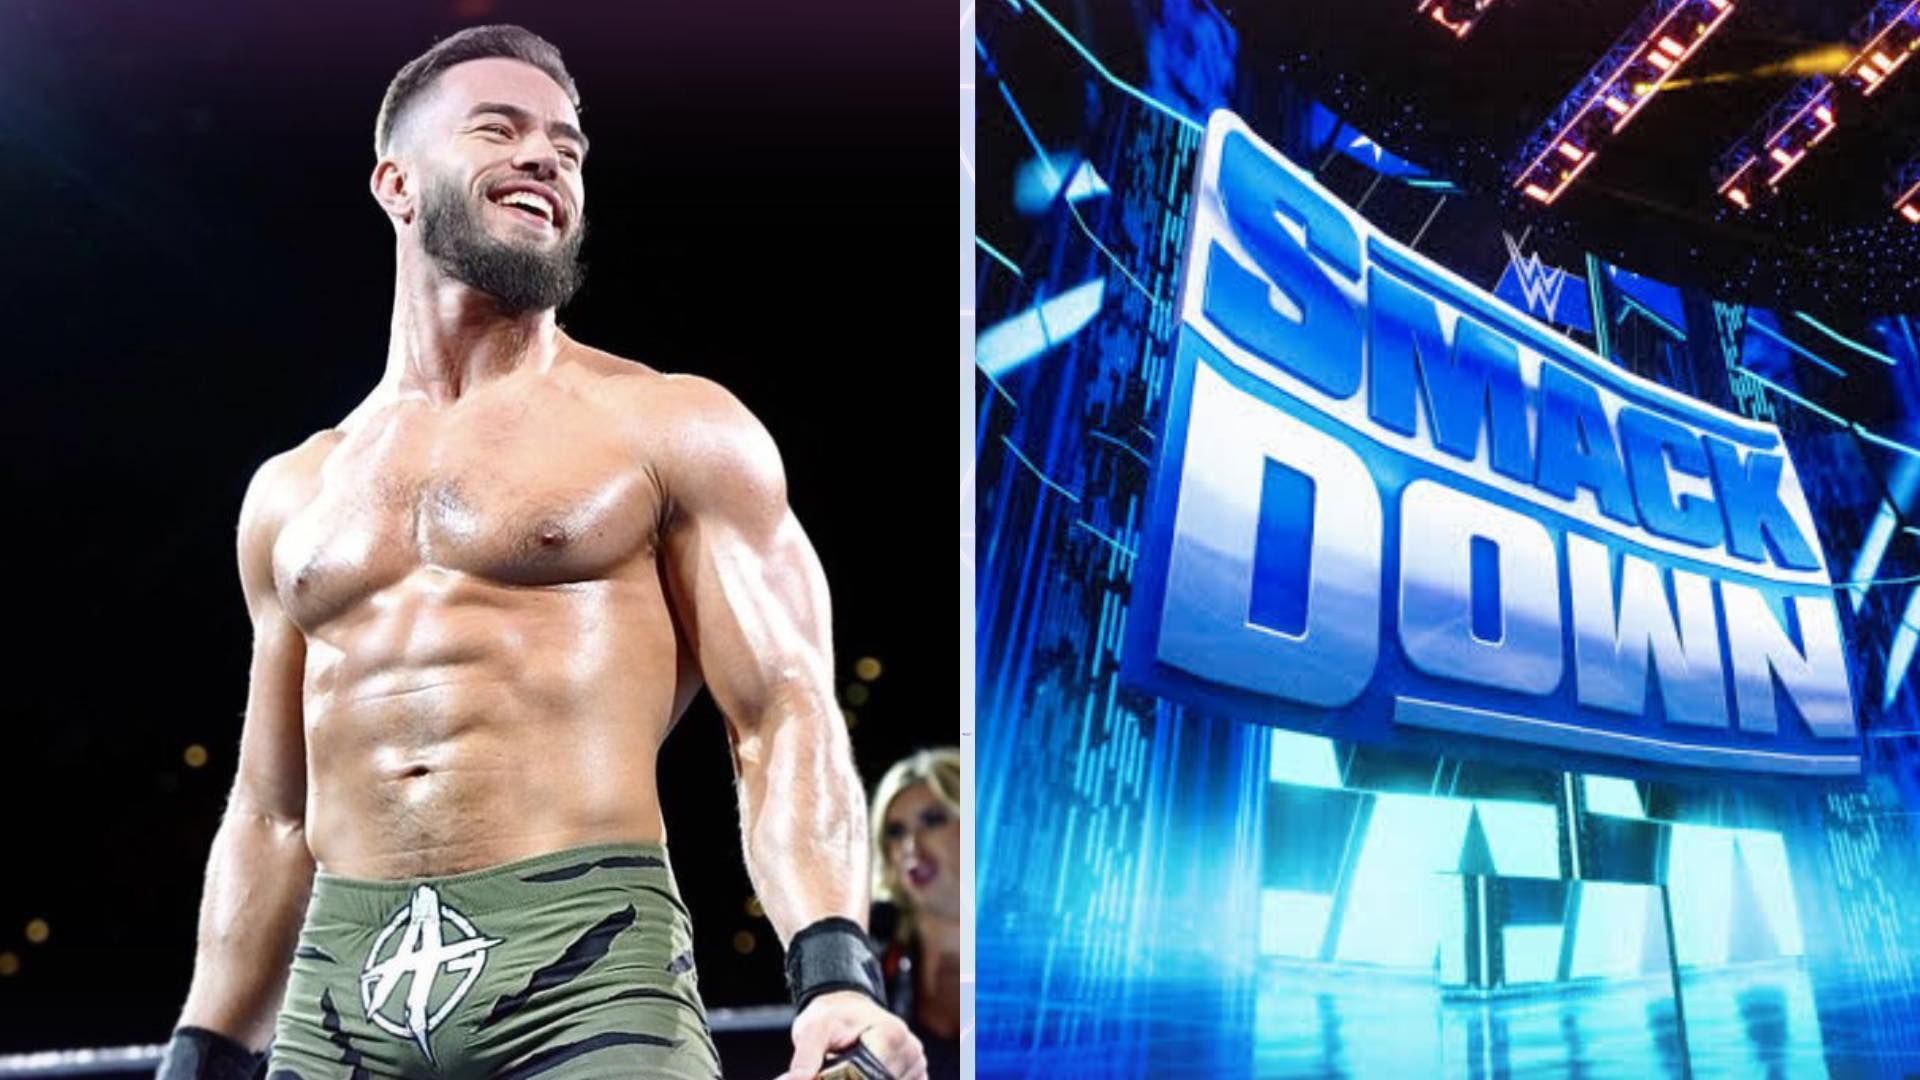 Austin Theory may have a new partner on WWE SmackDown